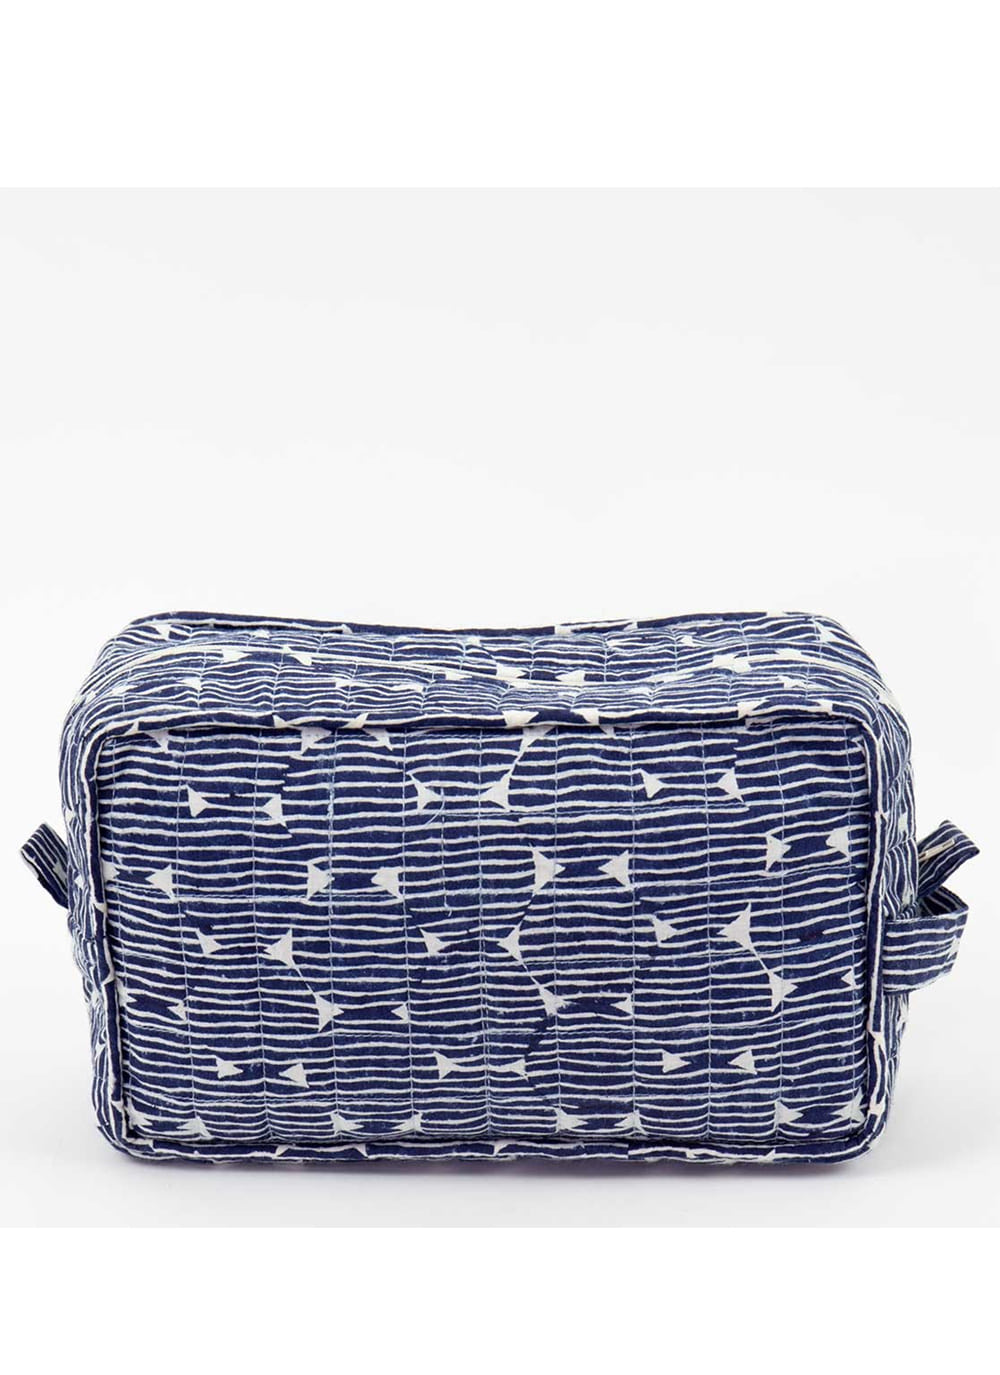 ROUNDS Toiletry bag M, blue